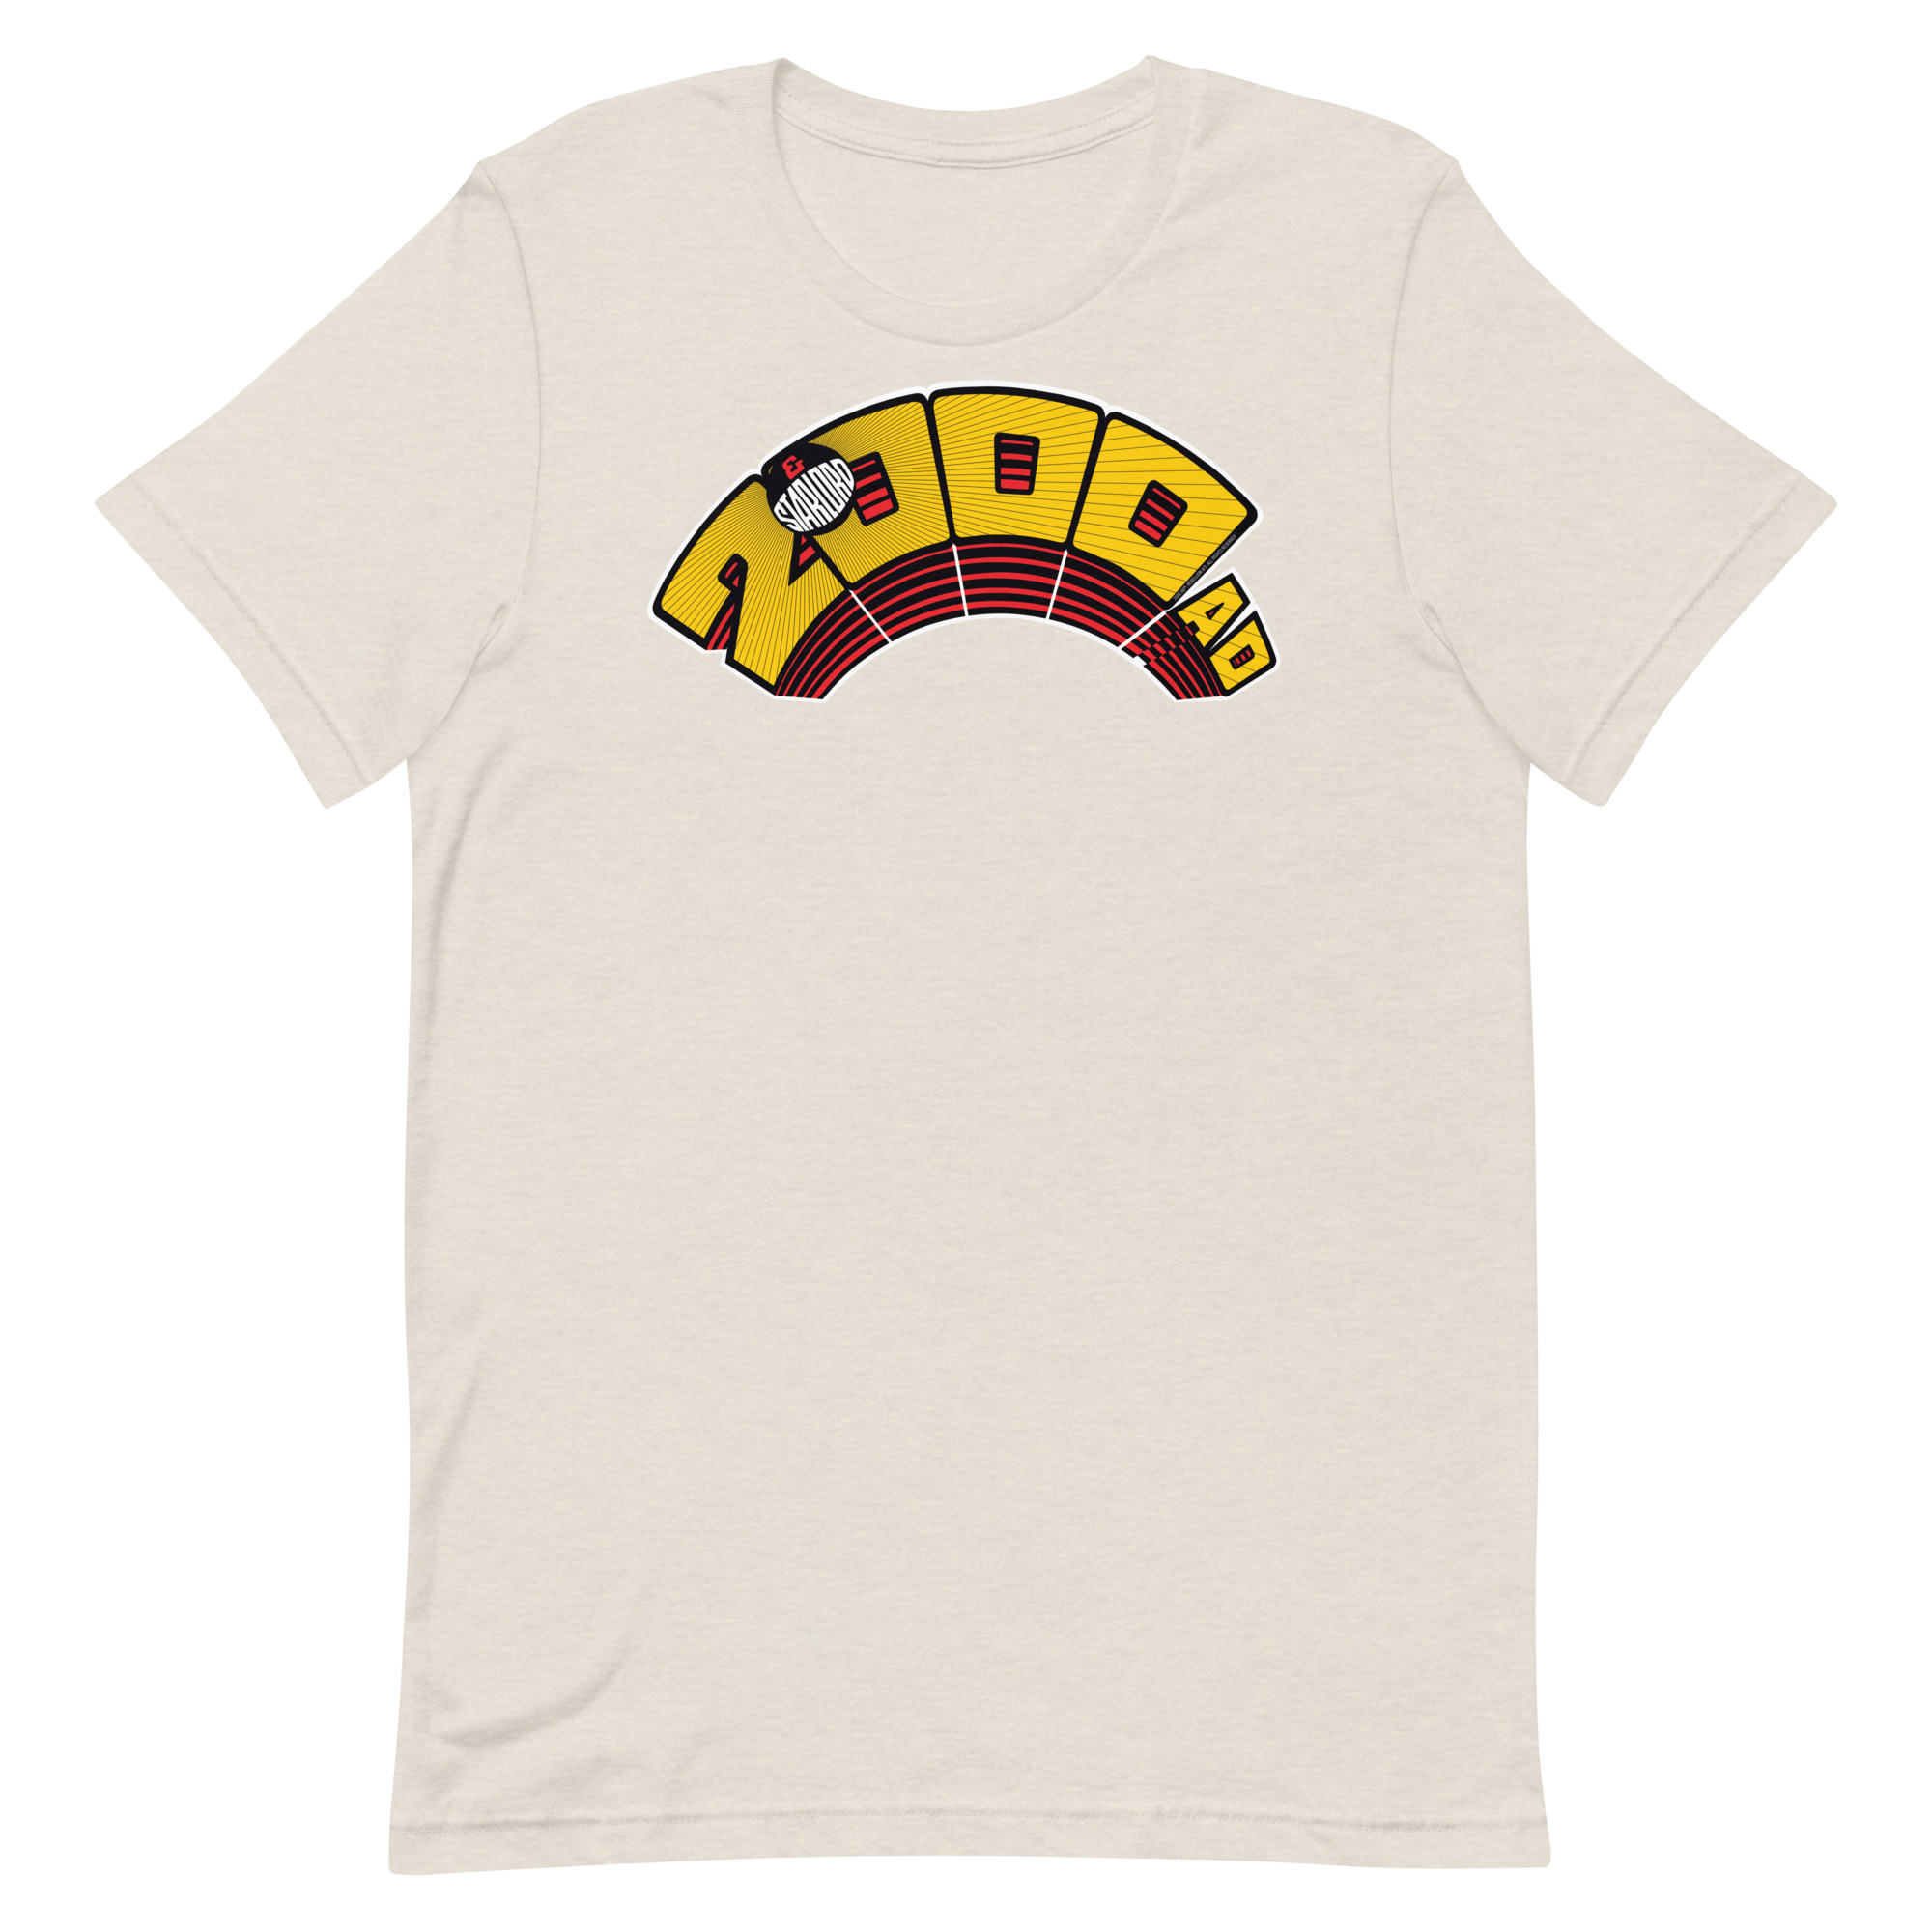 Image of a Heather Dust coloured 2000AD Starlord Arch t-shirt featuring a large 2000AD Starlord Arch logo in the middle